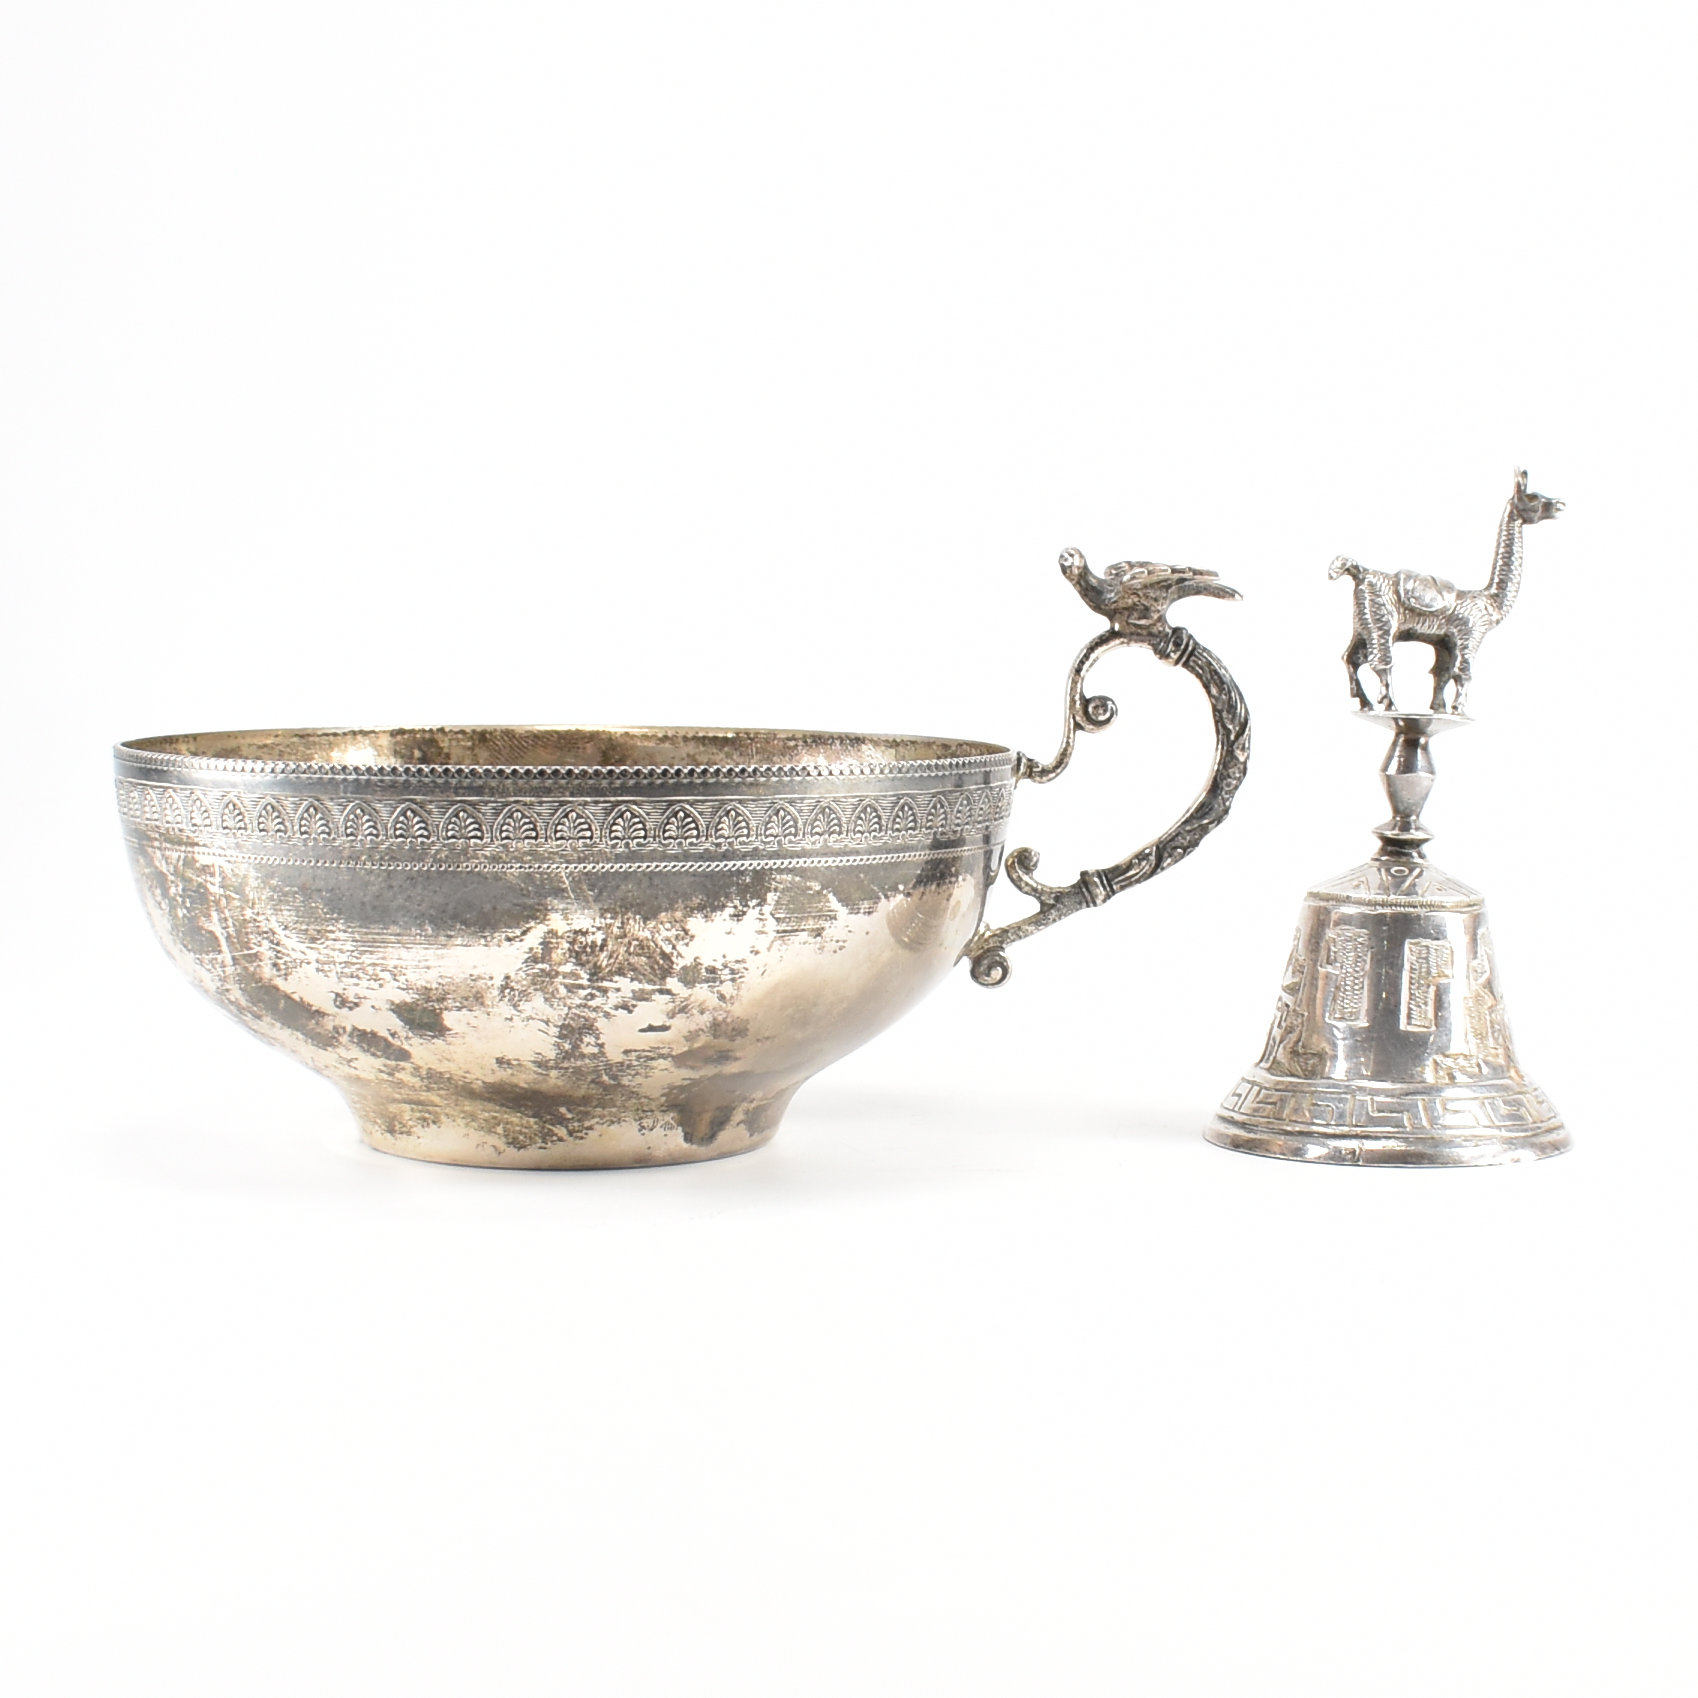 925 SILVER CUP BOWL & LAMA HANDLED BELL - Image 5 of 9